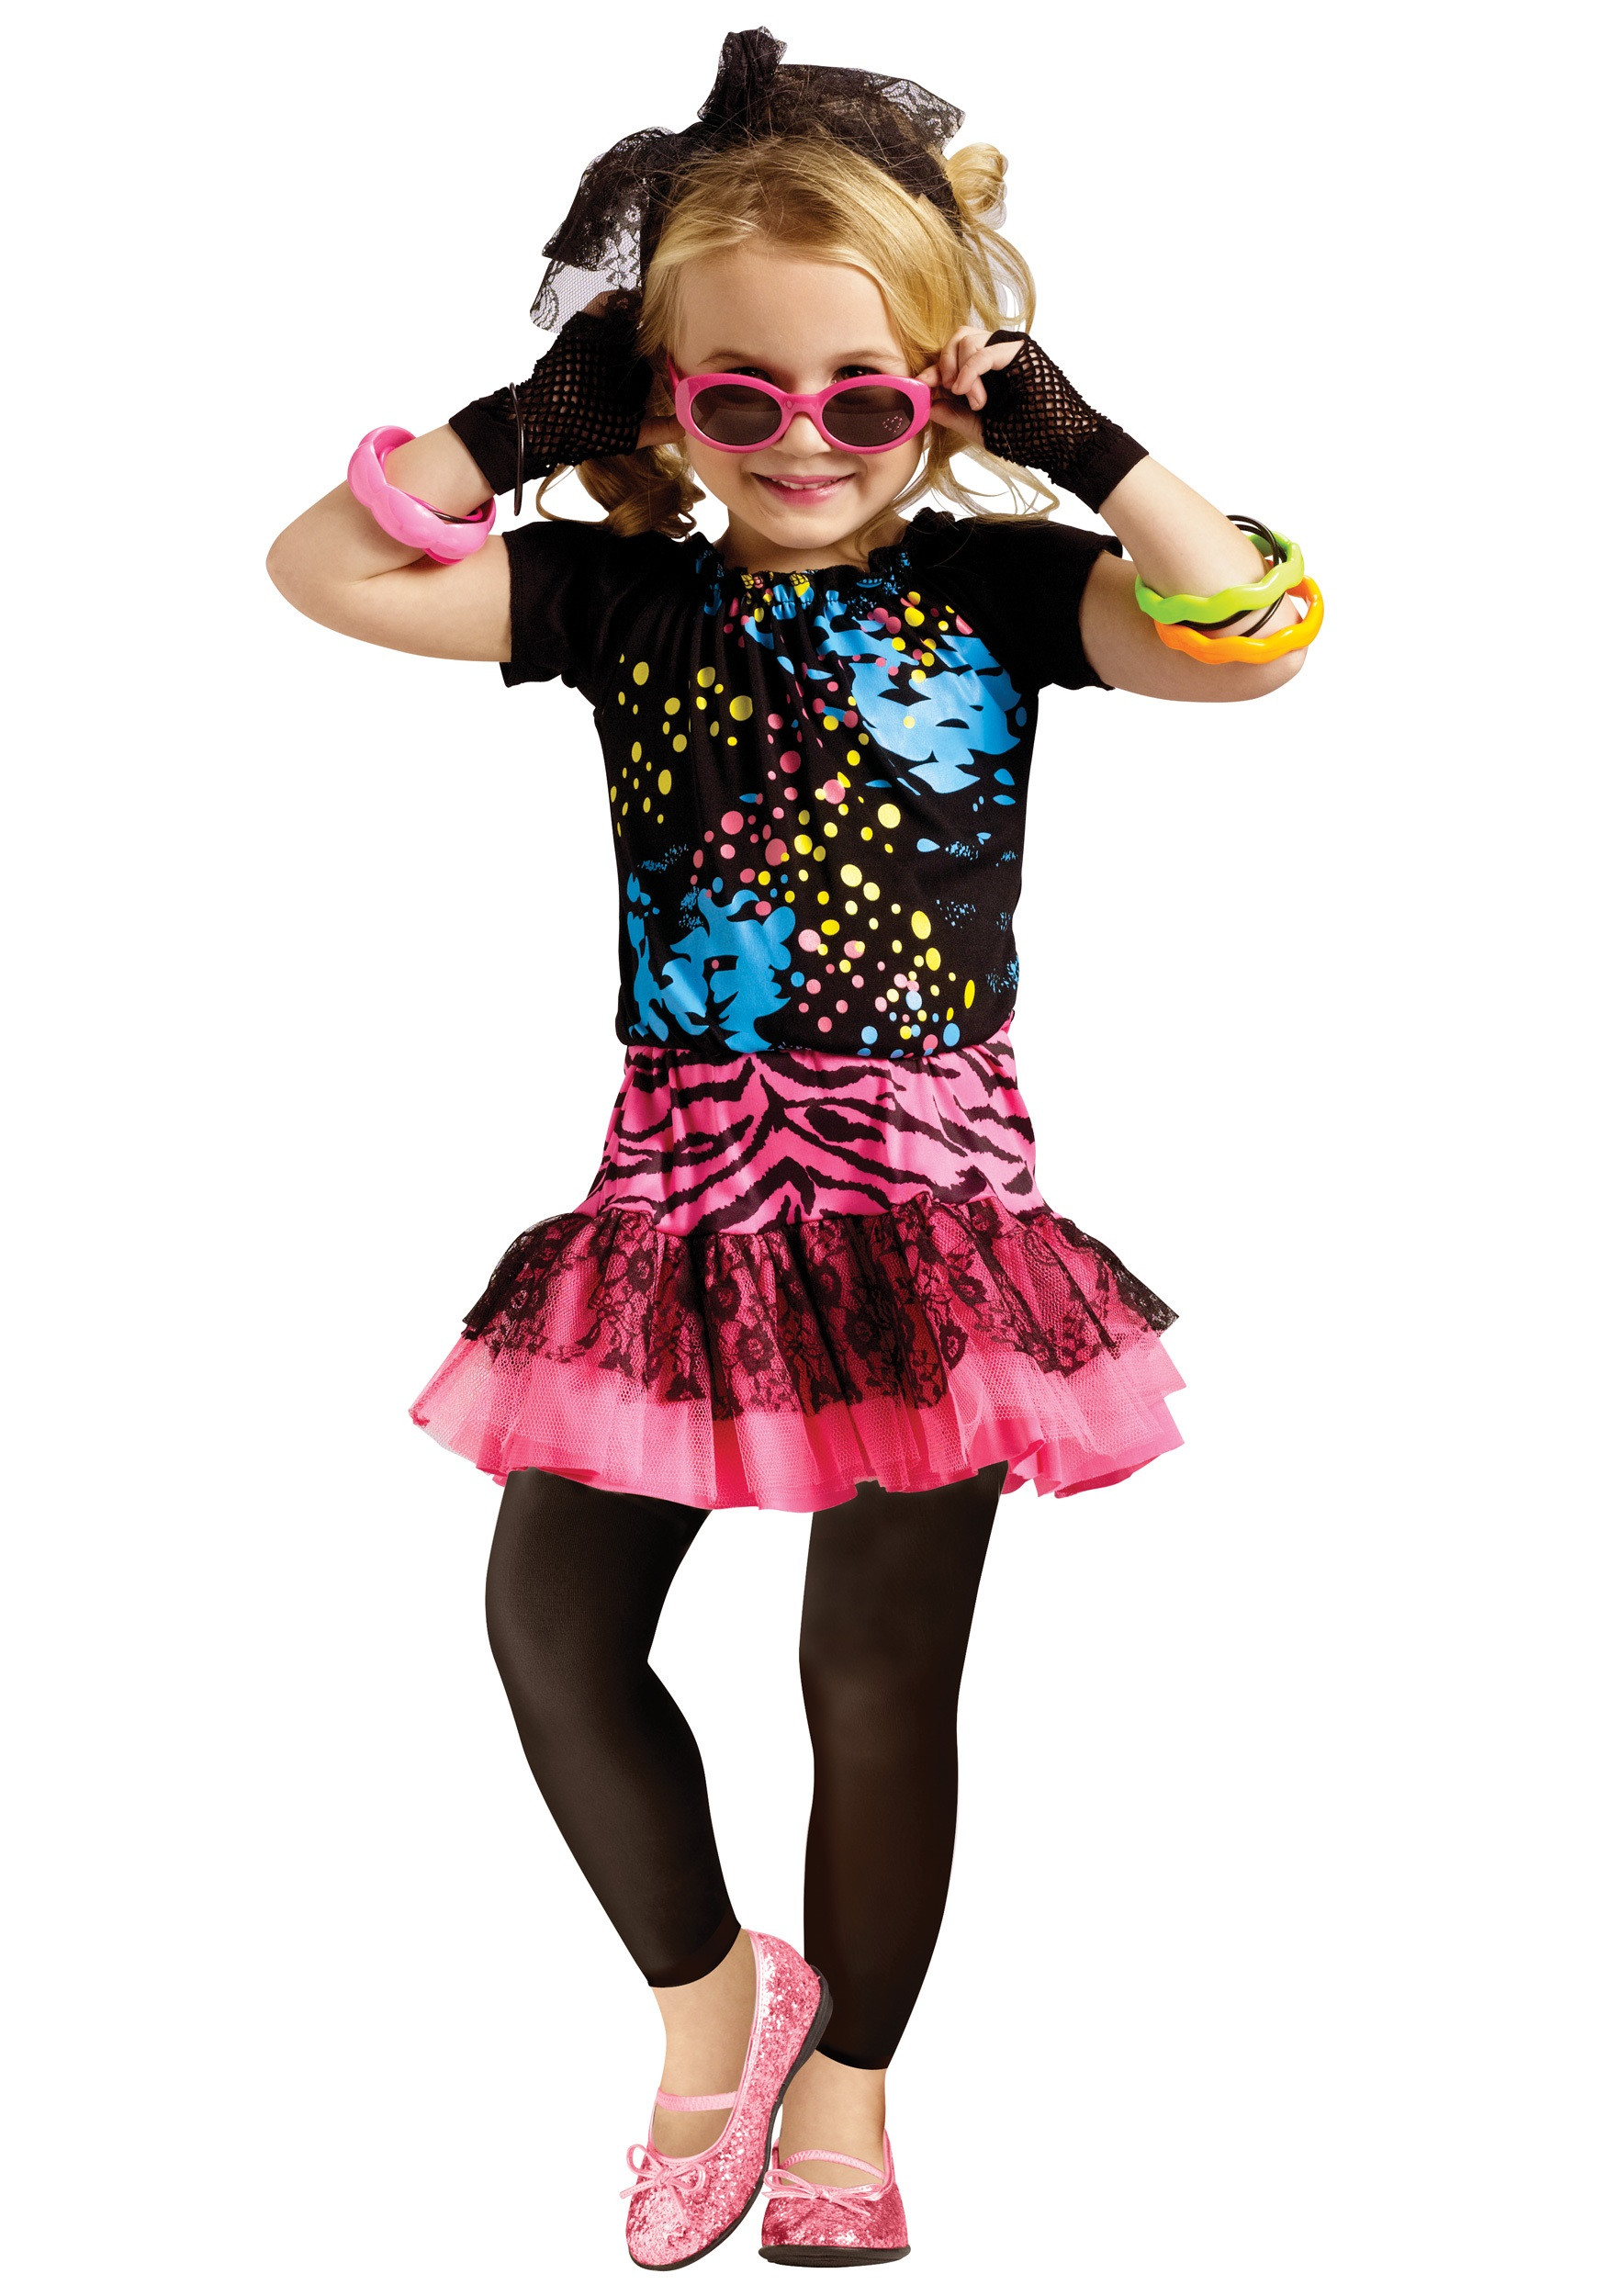 Halloween Party Dress Up Ideas
 80s Pop Party Toddler Costume